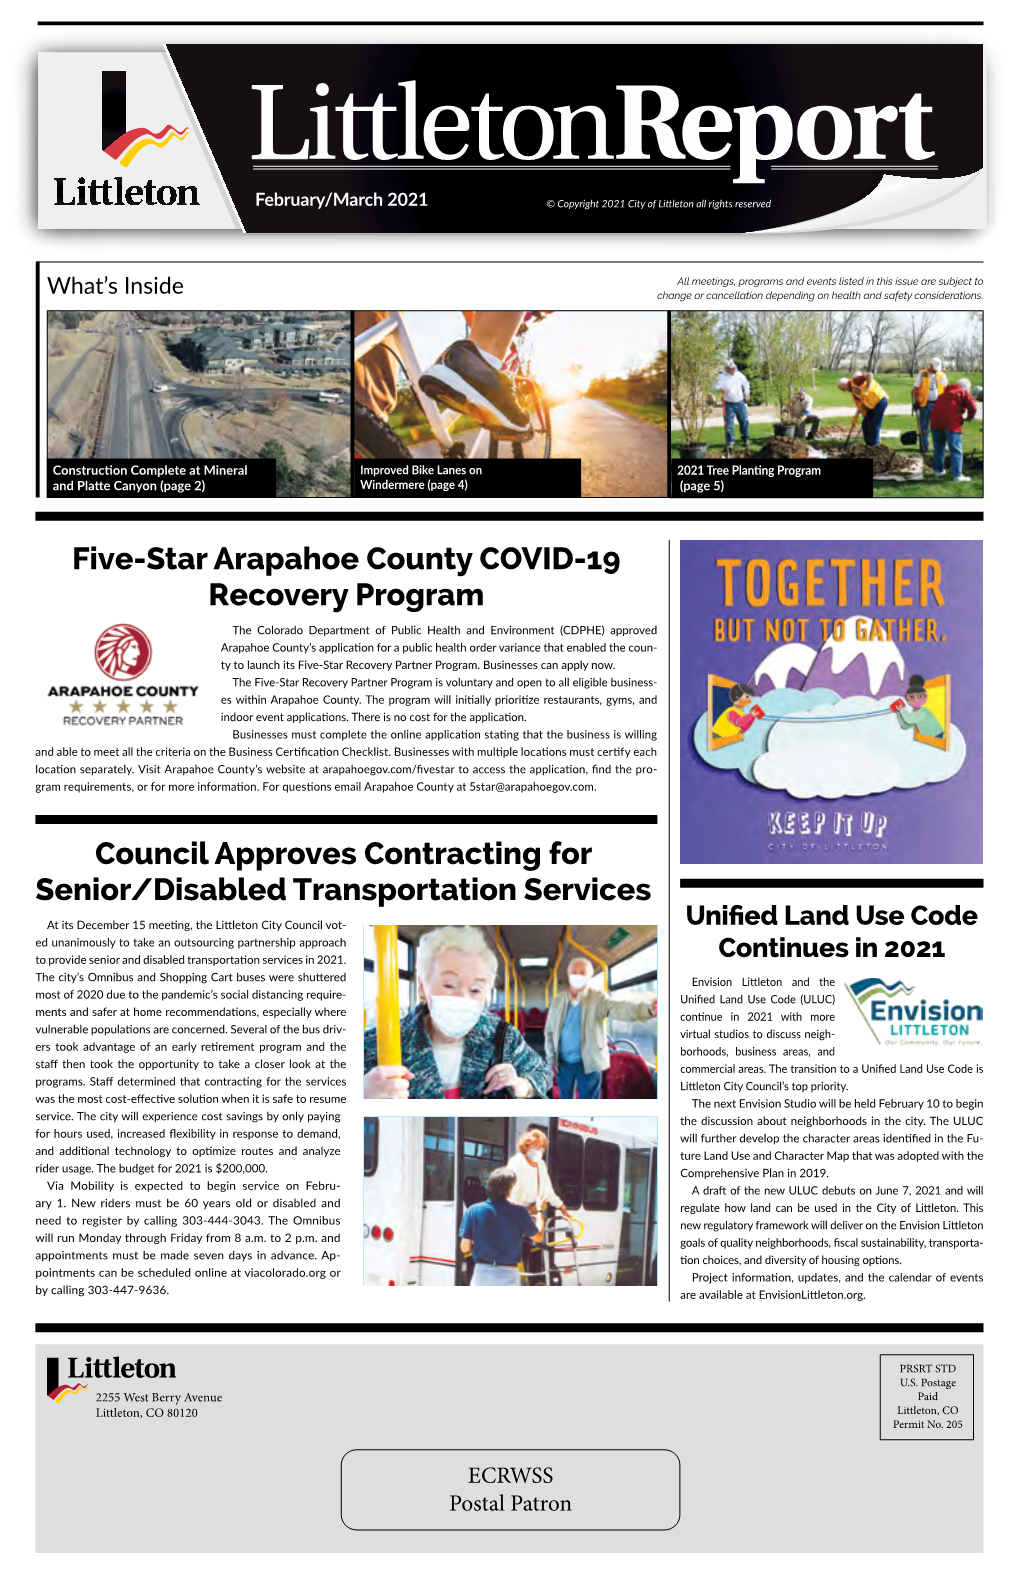 Five-Star Arapahoe County COVID-19 Recovery Program Council Approves Contracting for Senior/Disabled Transportation Services